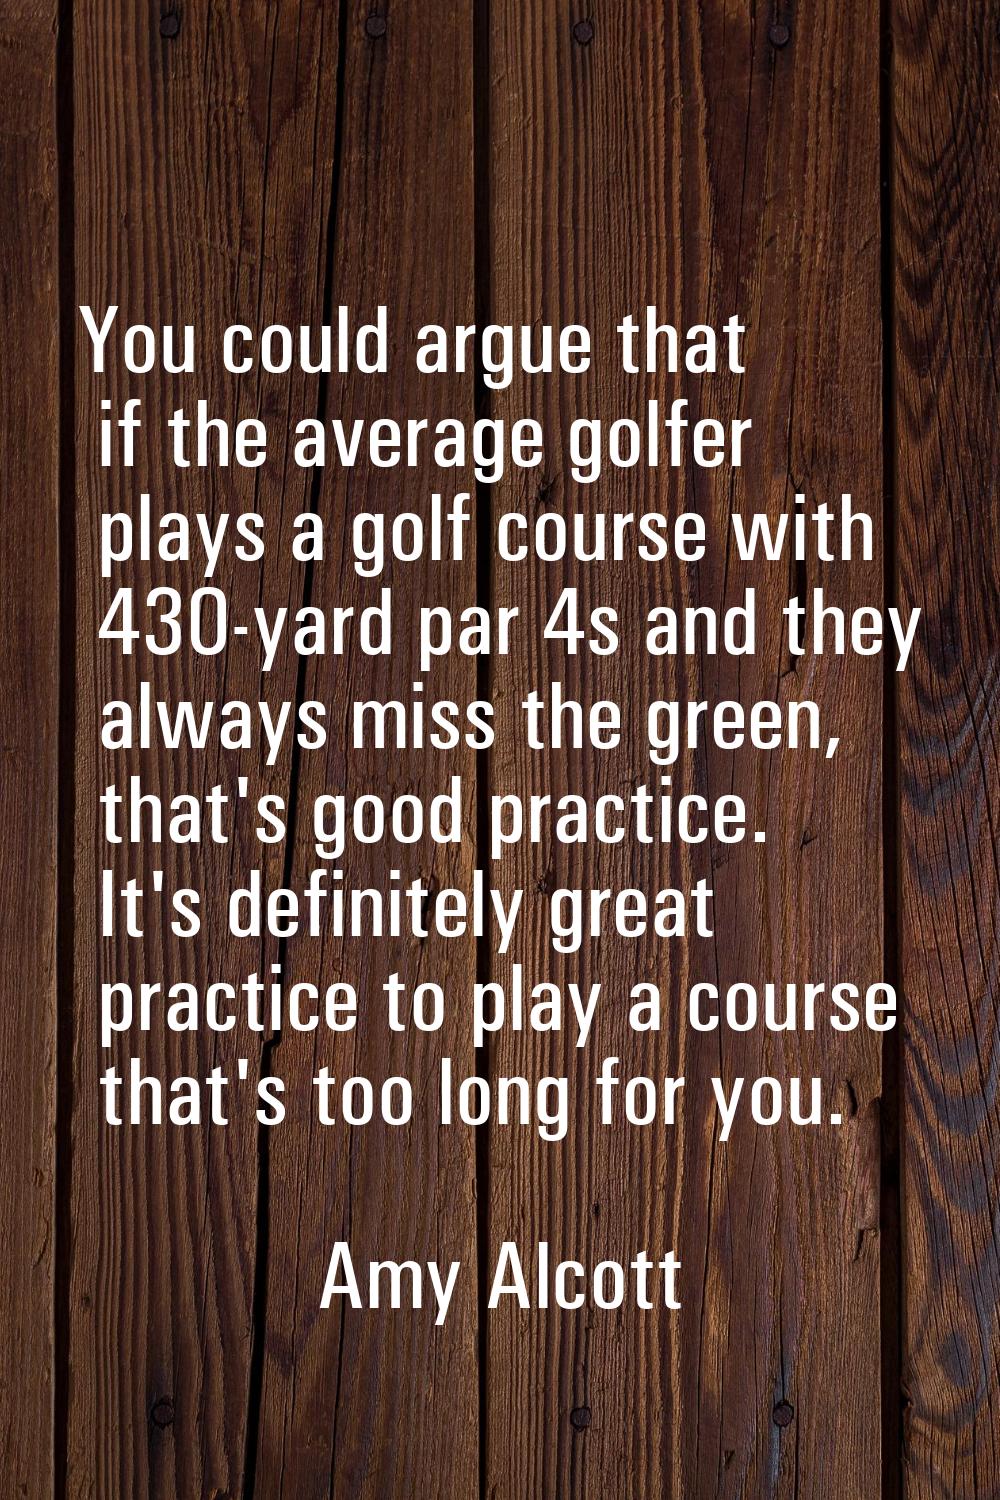 You could argue that if the average golfer plays a golf course with 430-yard par 4s and they always